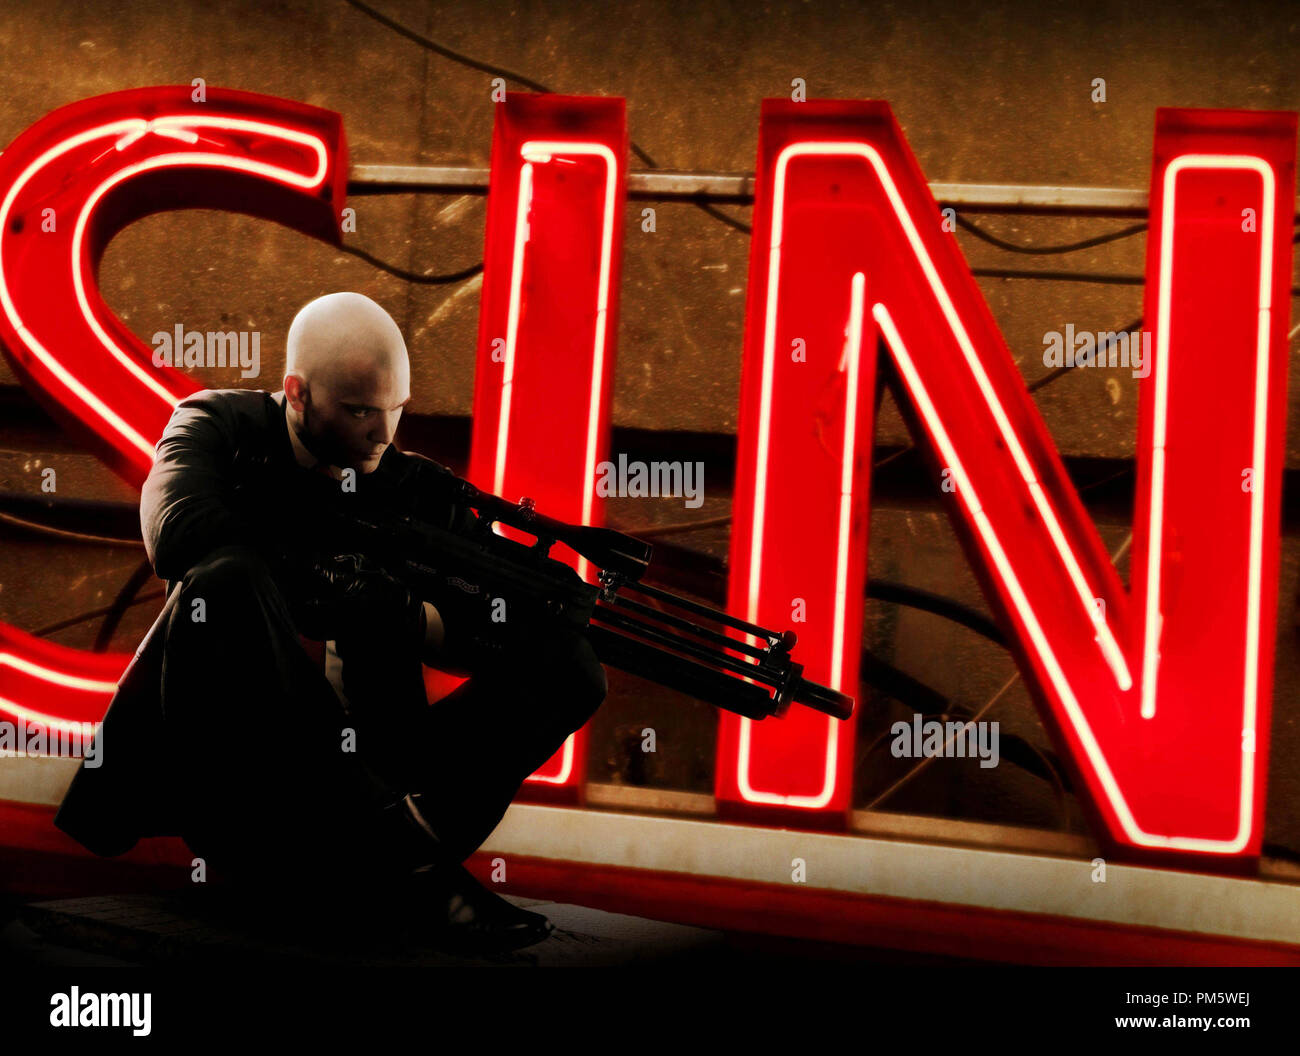 Studio Publicity Still from 'Hitman' Timothy Olyphant © 2007 20th Century Fox Photo credit: Rico Torres    File Reference # 307381036THA  For Editorial Use Only -  All Rights Reserved Stock Photo